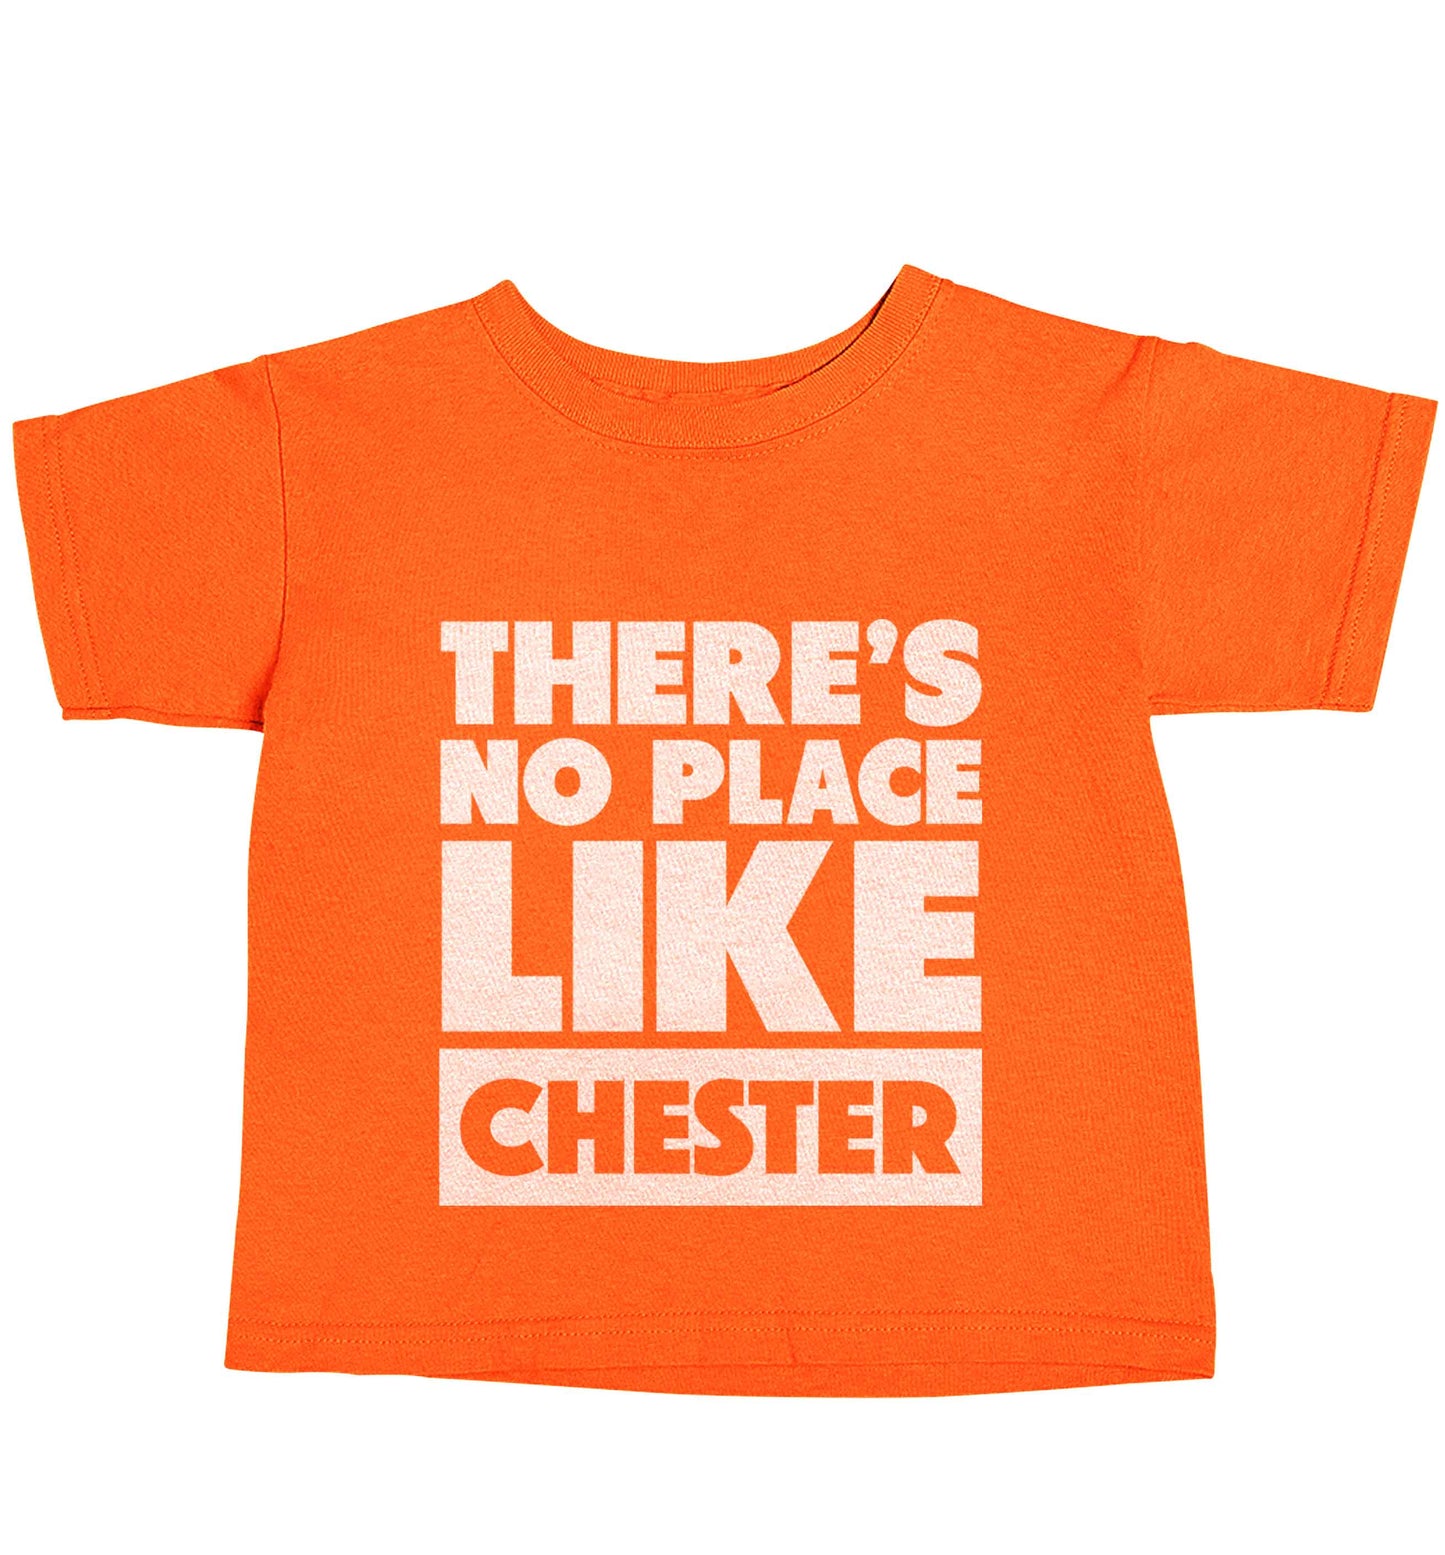 There's no place like Chester orange baby toddler Tshirt 2 Years